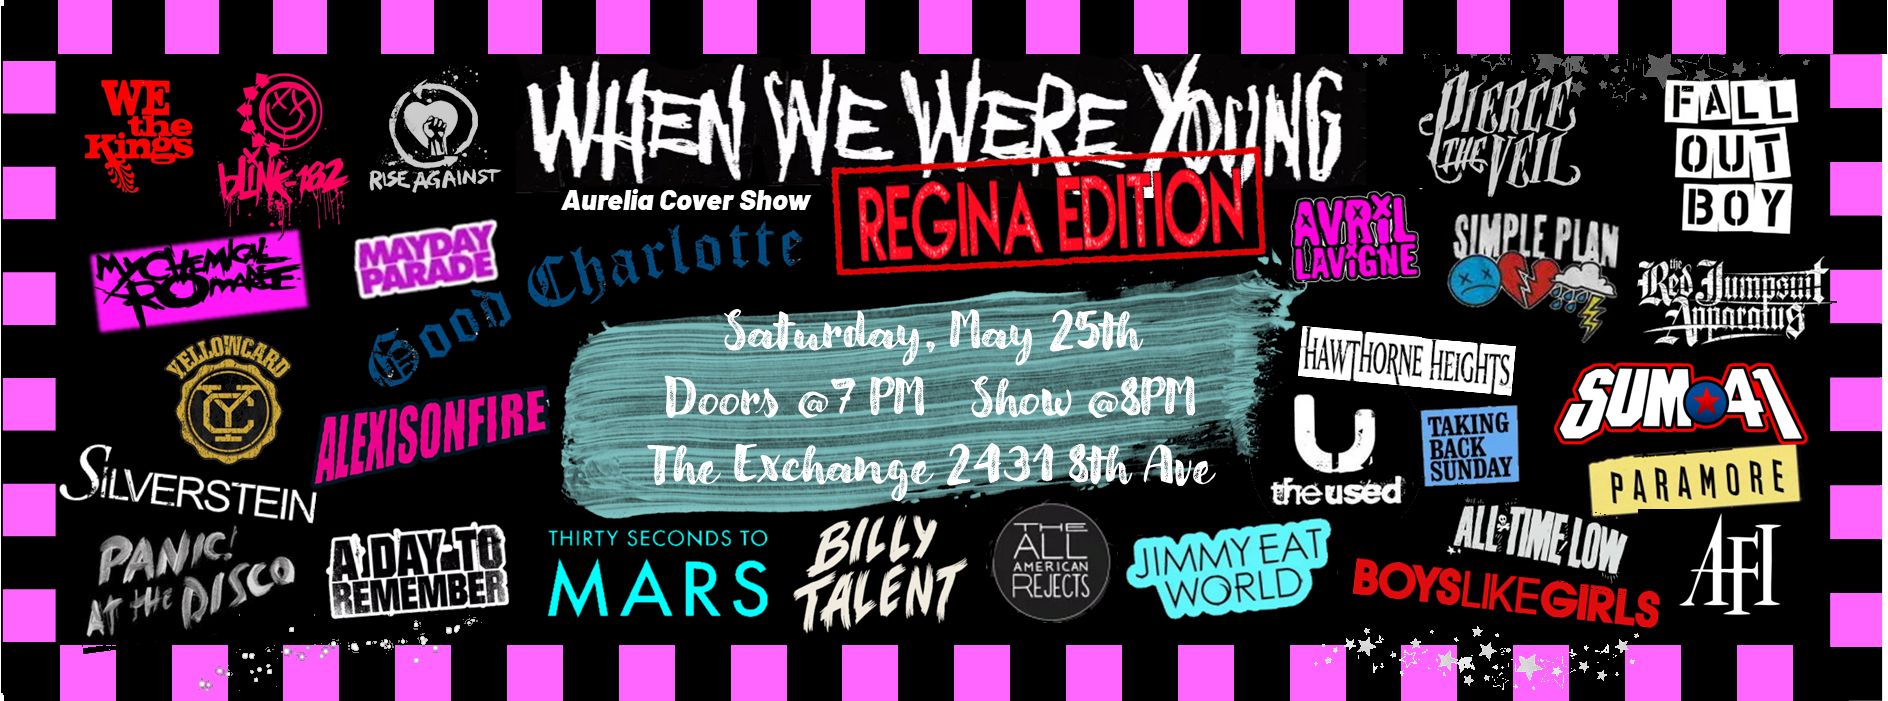 When We Were Young - Regina Edition cover show by Aurelia: Second Date Added 